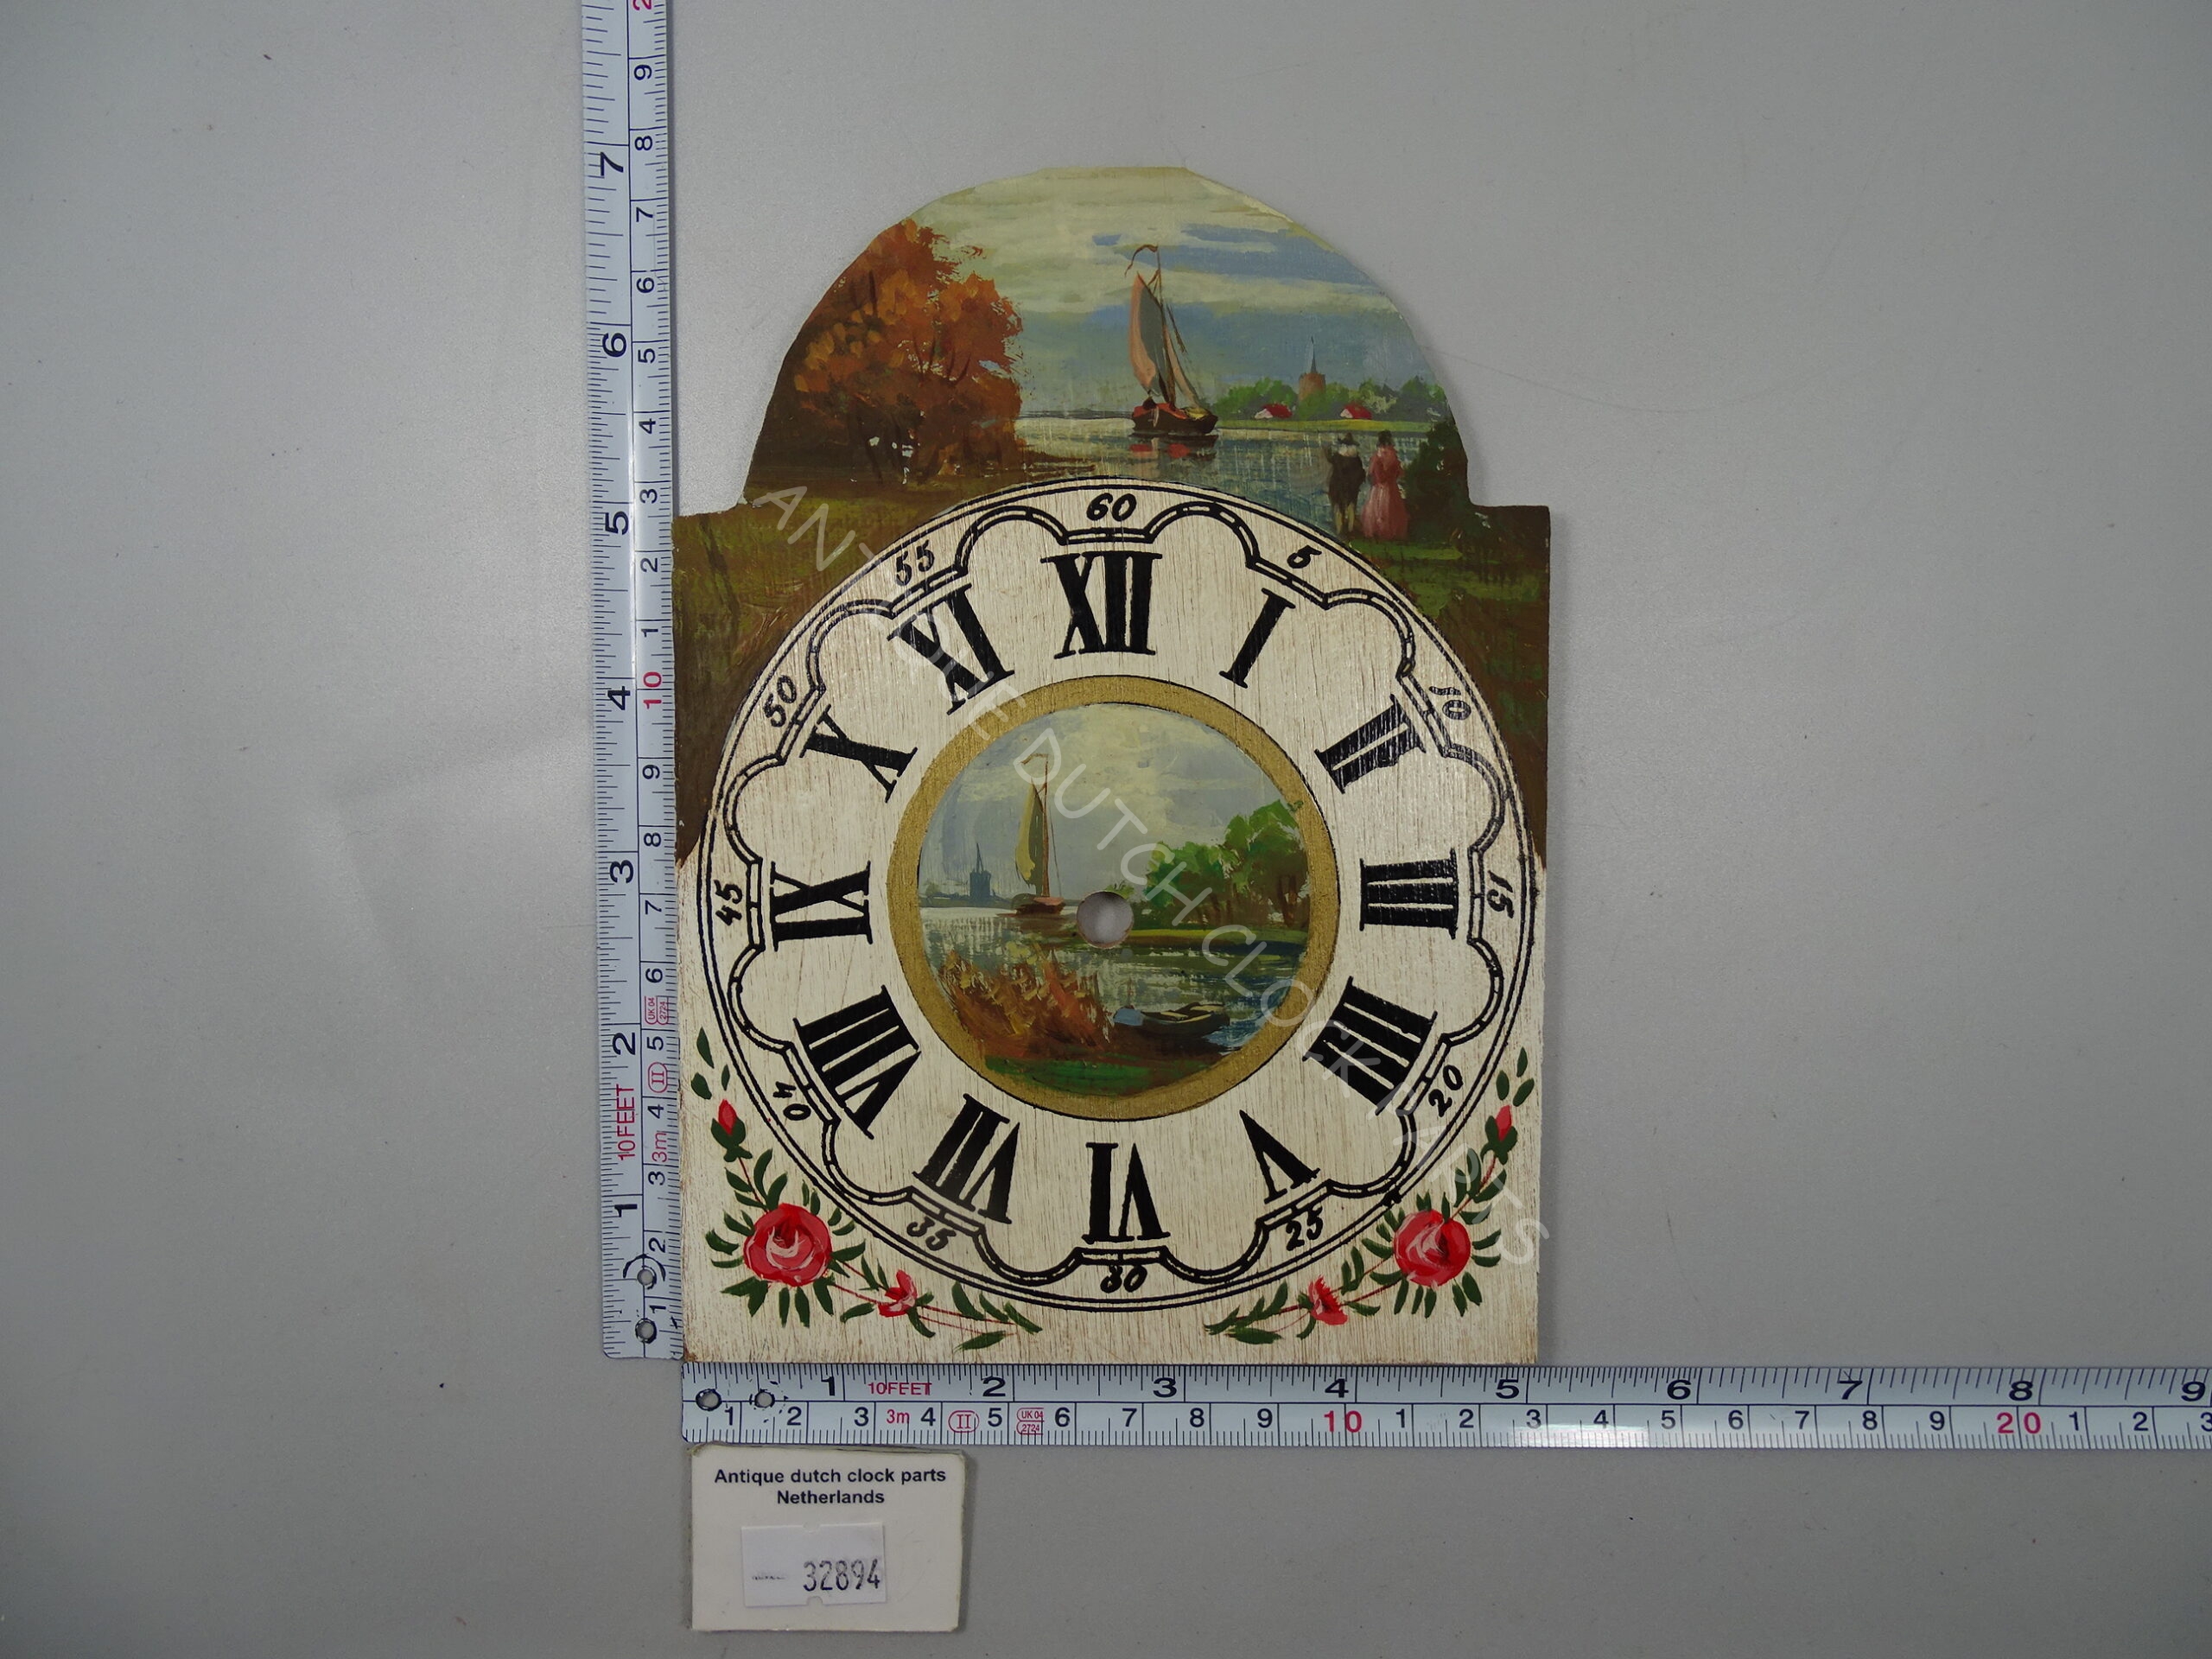 FOLKLORE HAND PAINTED WOODEN FRONT PLATE WITH DIAL FOR A DUTCH SALLANDSE CLOCK